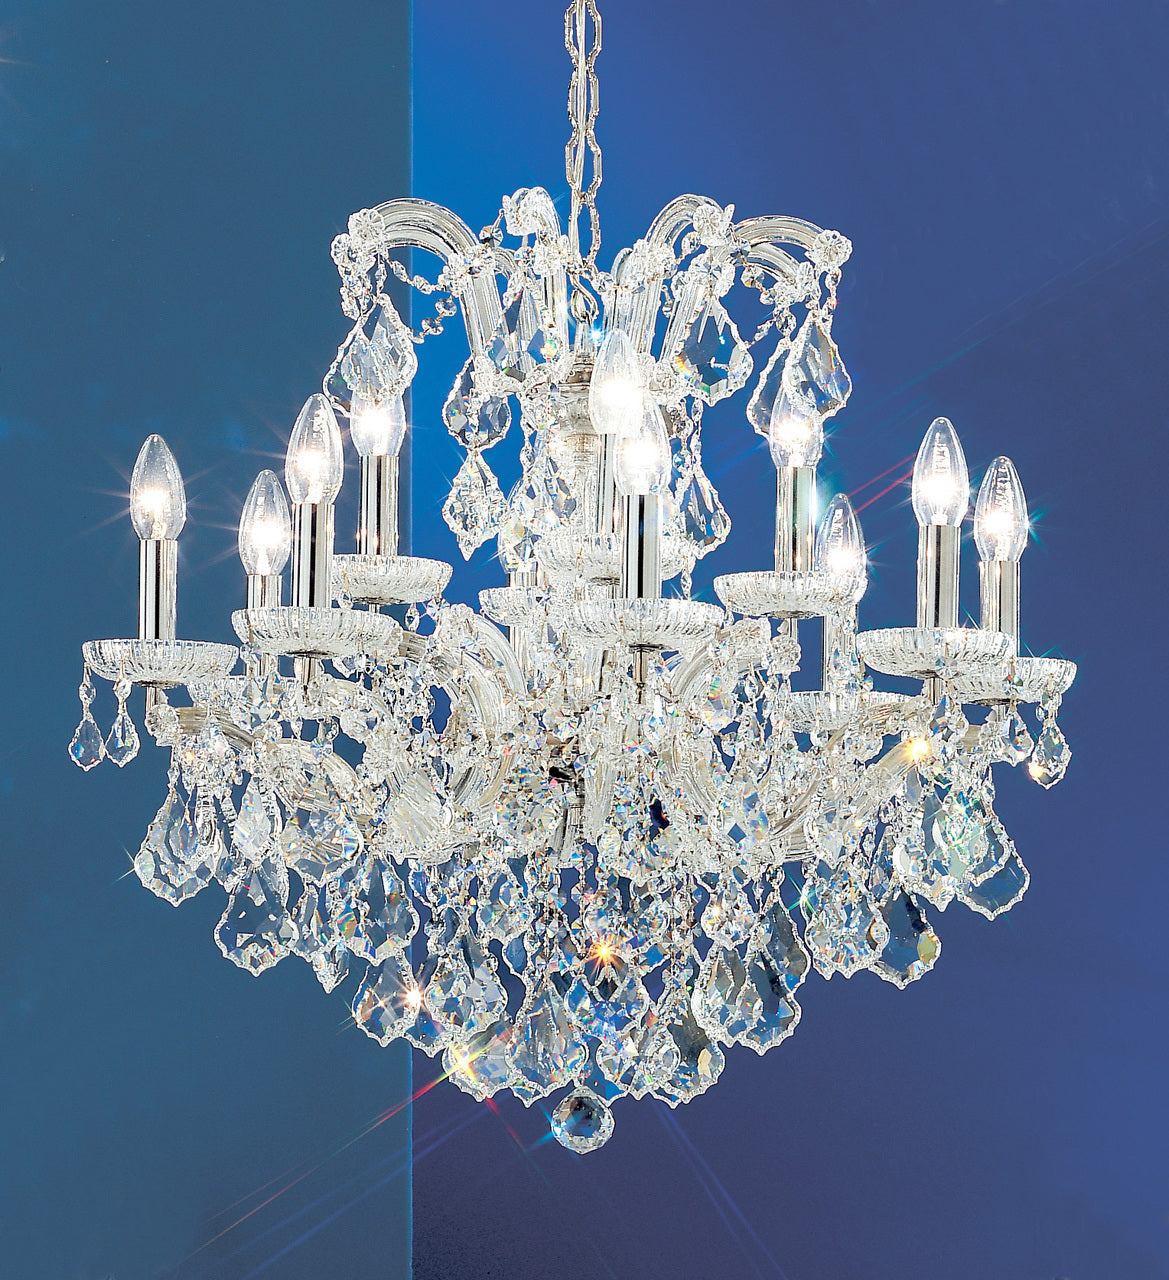 Classic Lighting 8132 CH S Maria Theresa Traditional Crystal Chandelier in Chrome (Imported from Italy)